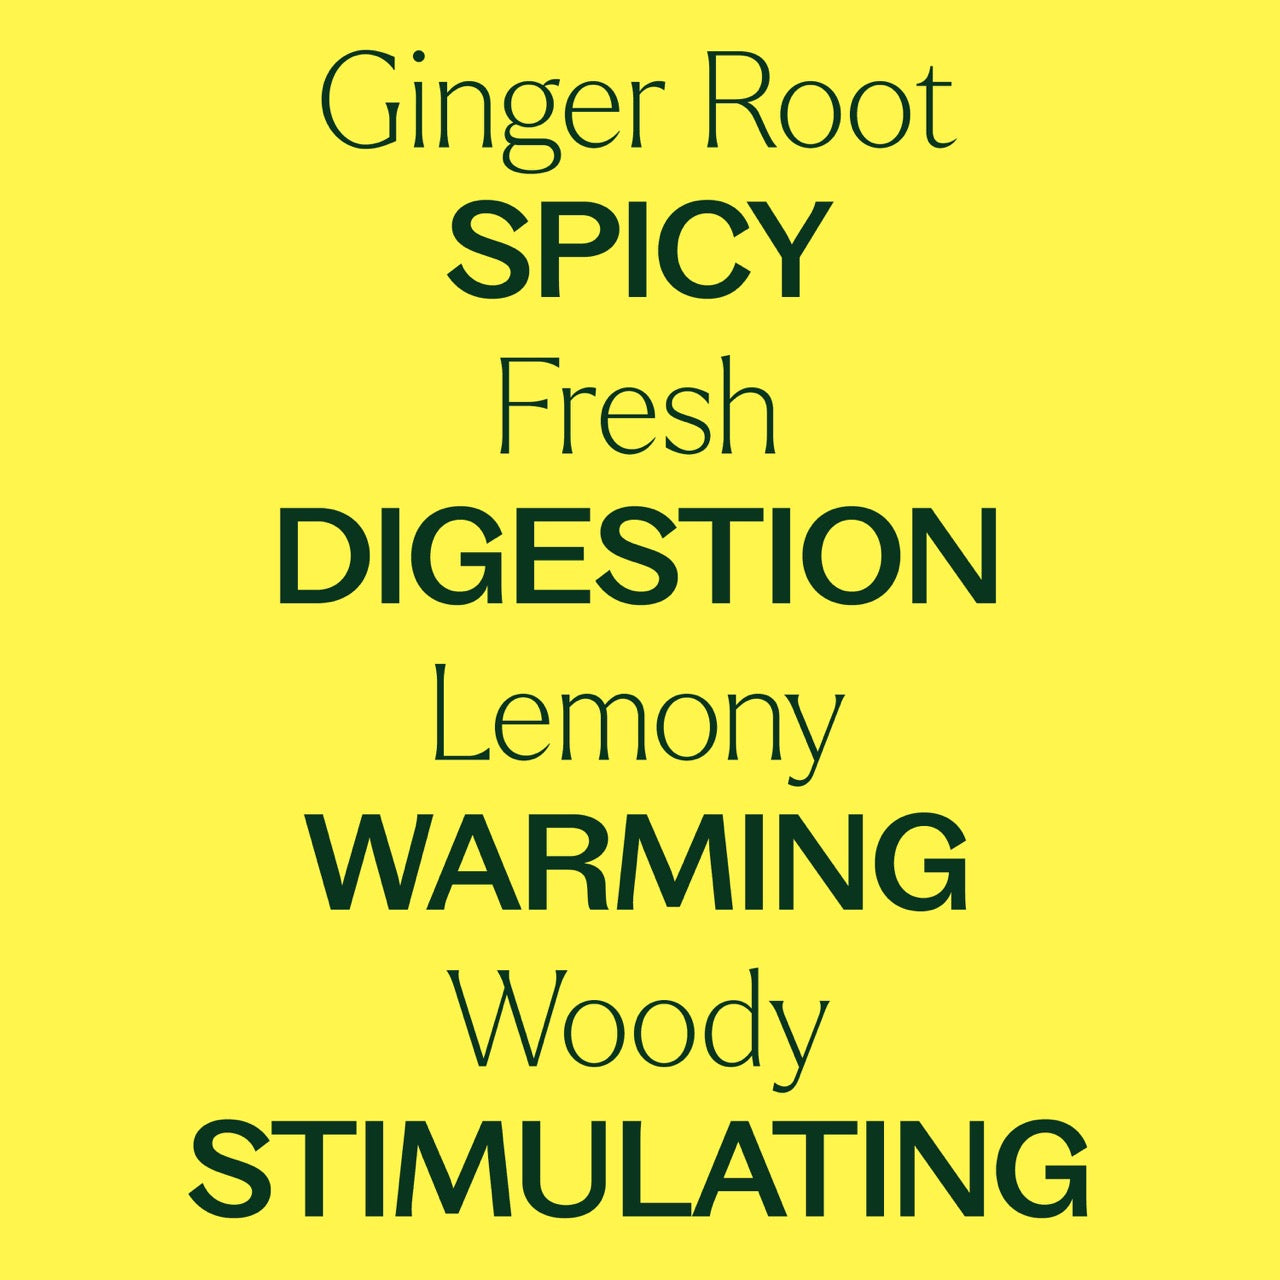 Ginger Root CO2 Extract key features: Spicy, fresh, digestion, lemony, warming, woody, stimulating